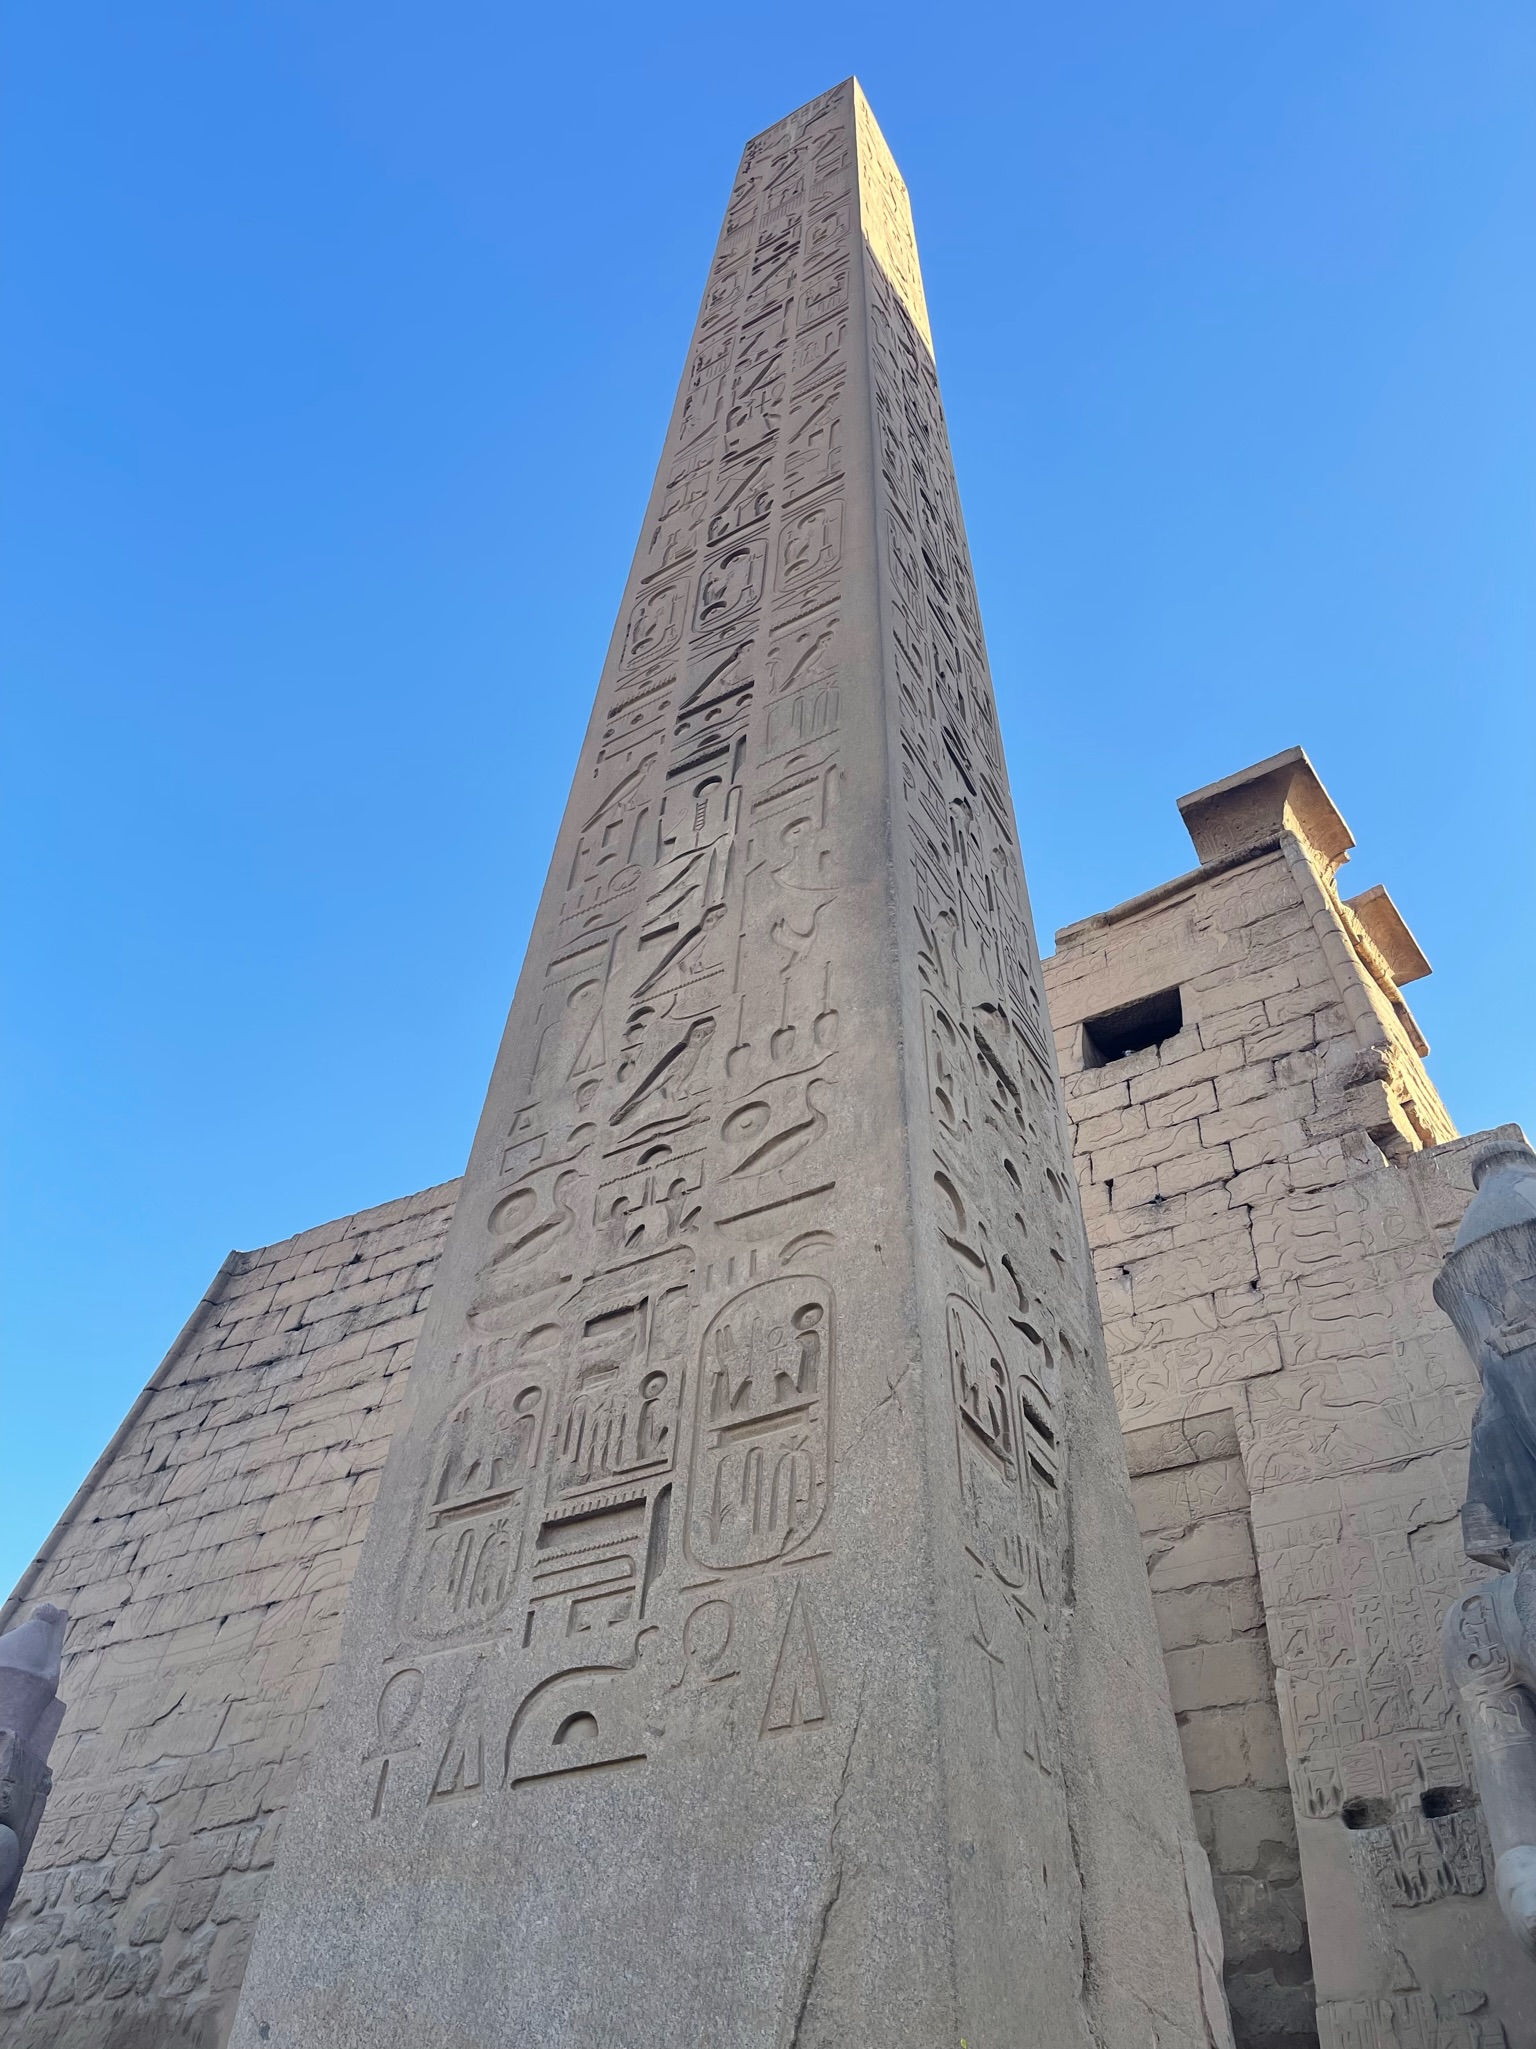 planning a trip to the middle east, where to go in the middle east, how to plan a trip to the middle east, Luxor, Egypt, erin busbee, busbee style, busbee family travels, what to do in luxor, luxor temple